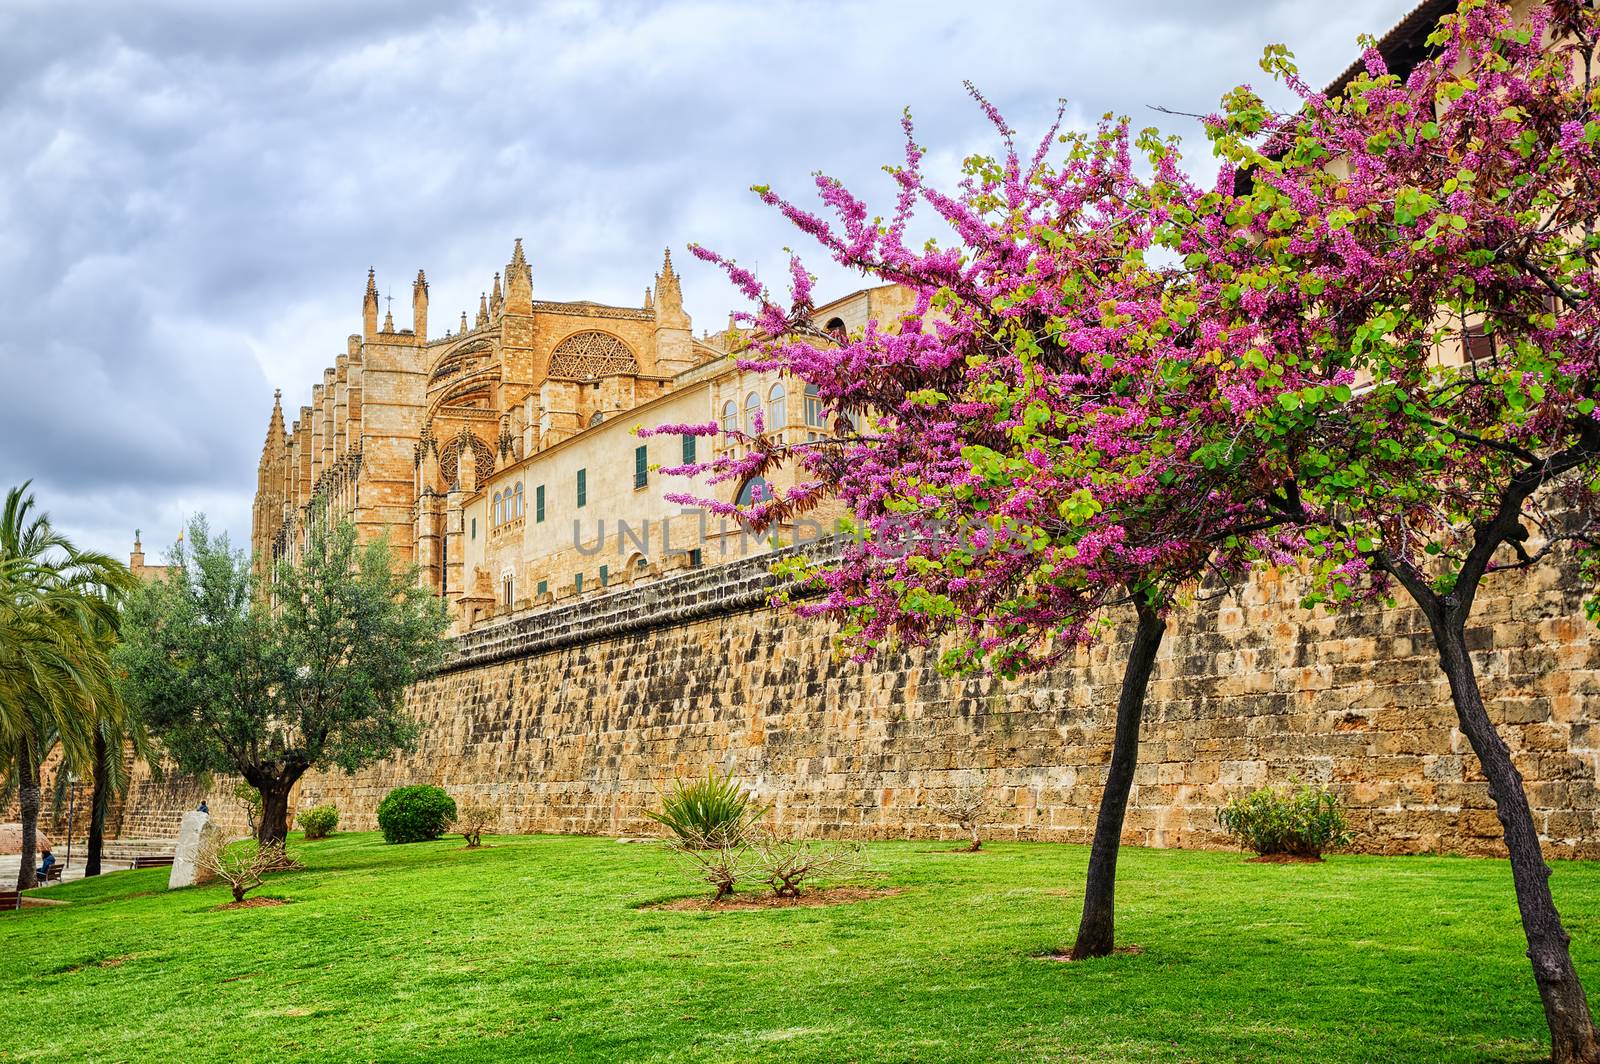 Blooming cherry tree in the cathedral garden, Palma de Mallorca, Spain by GlobePhotos